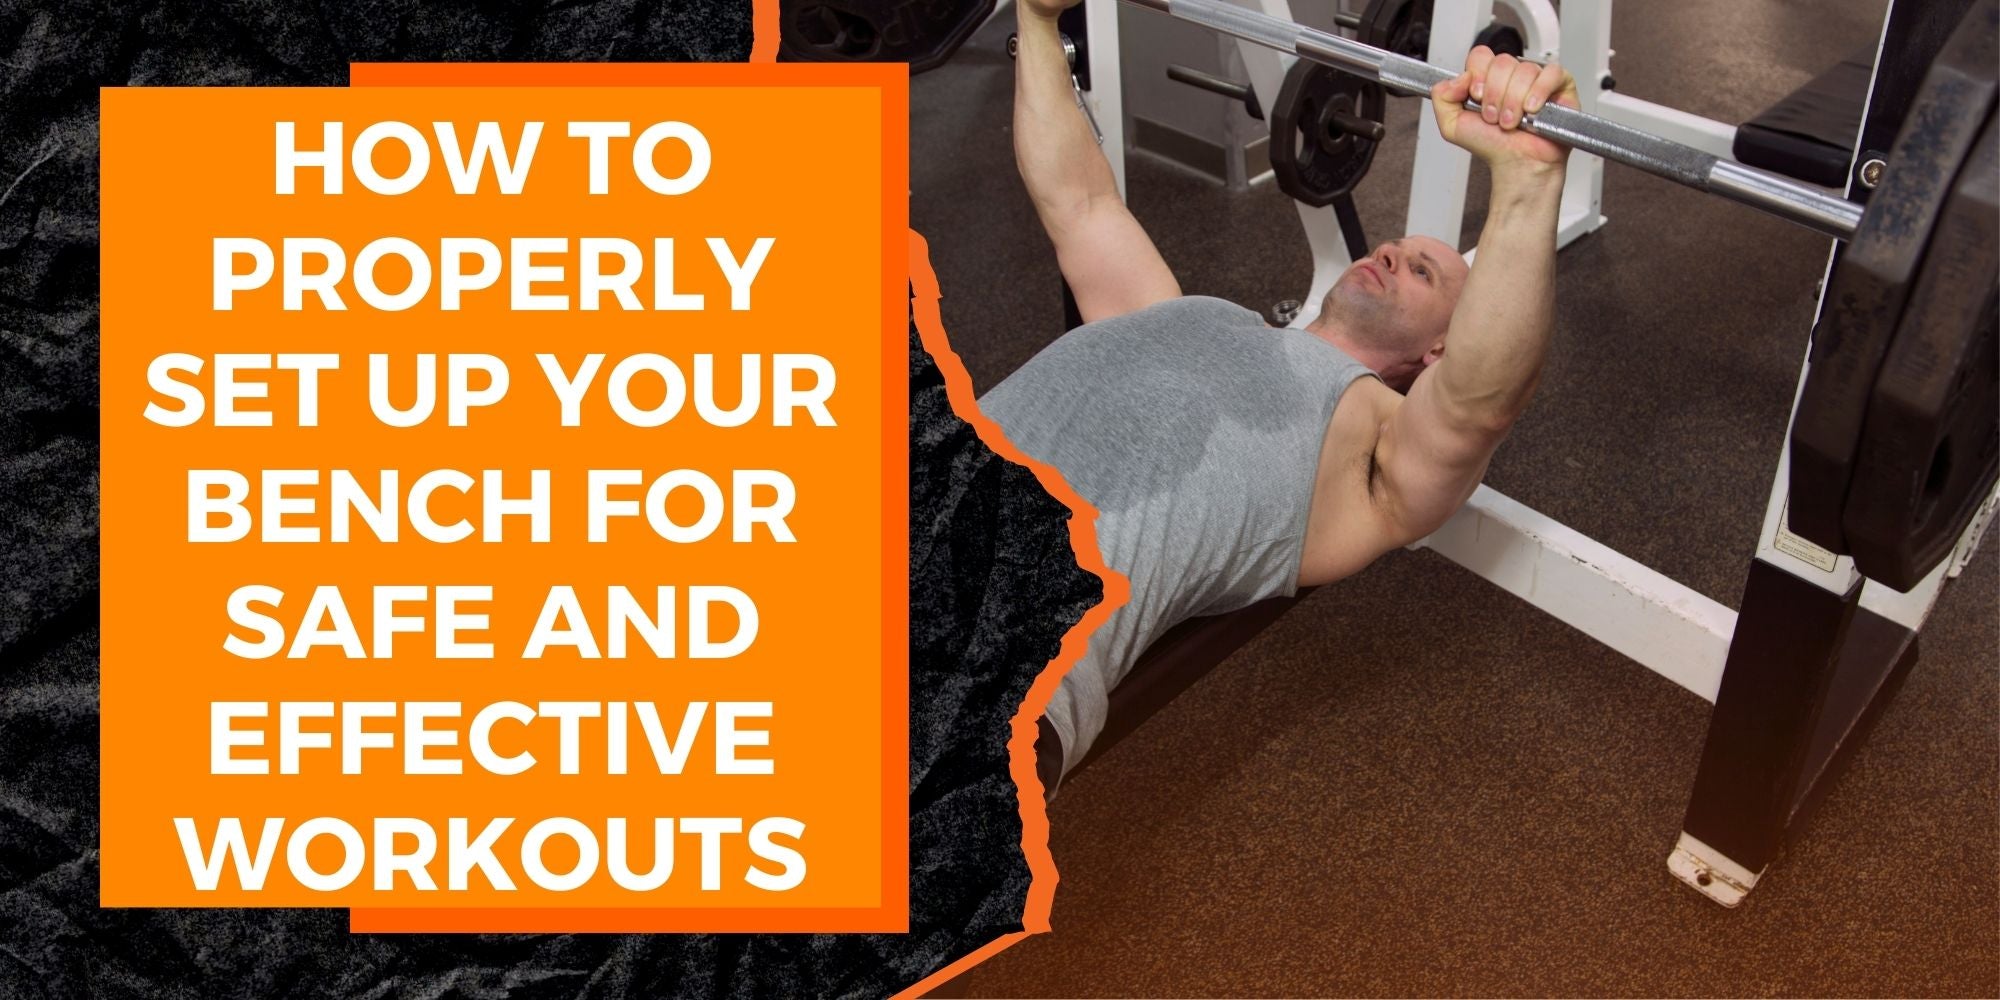 How to Properly Set Up Your Bench for Safe and Effective Workouts